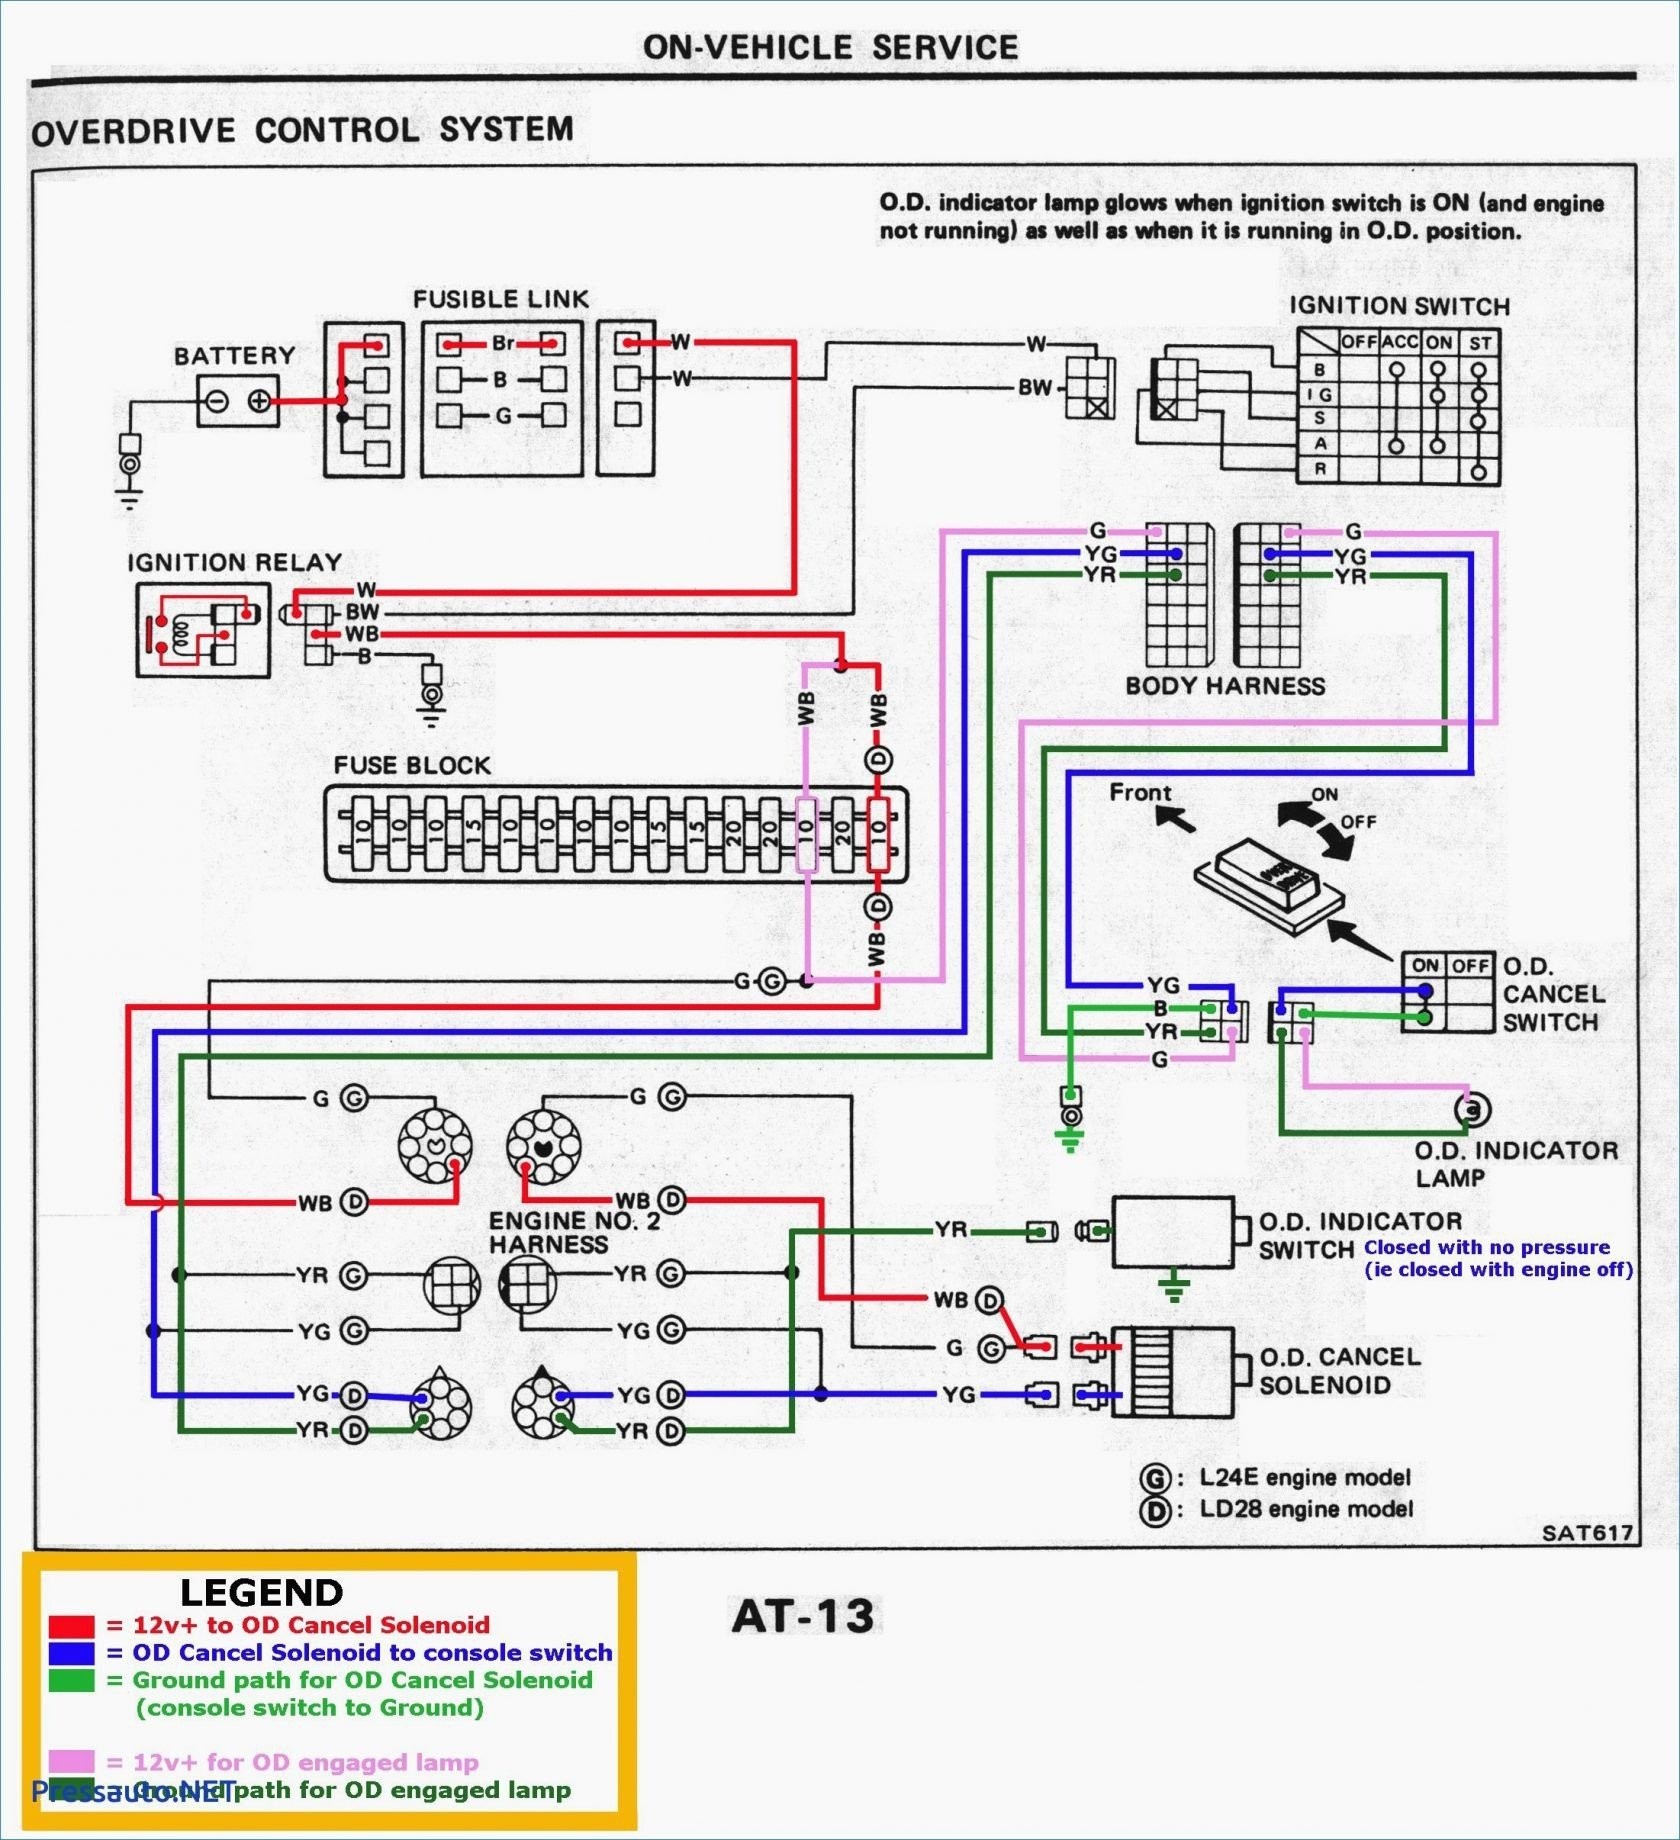 7 Wire Trailer Cable Diagram Wiring Technostalgia Diagram Led A1060led Wiring Diagram toolbox Of 7 Wire Trailer Cable Diagram